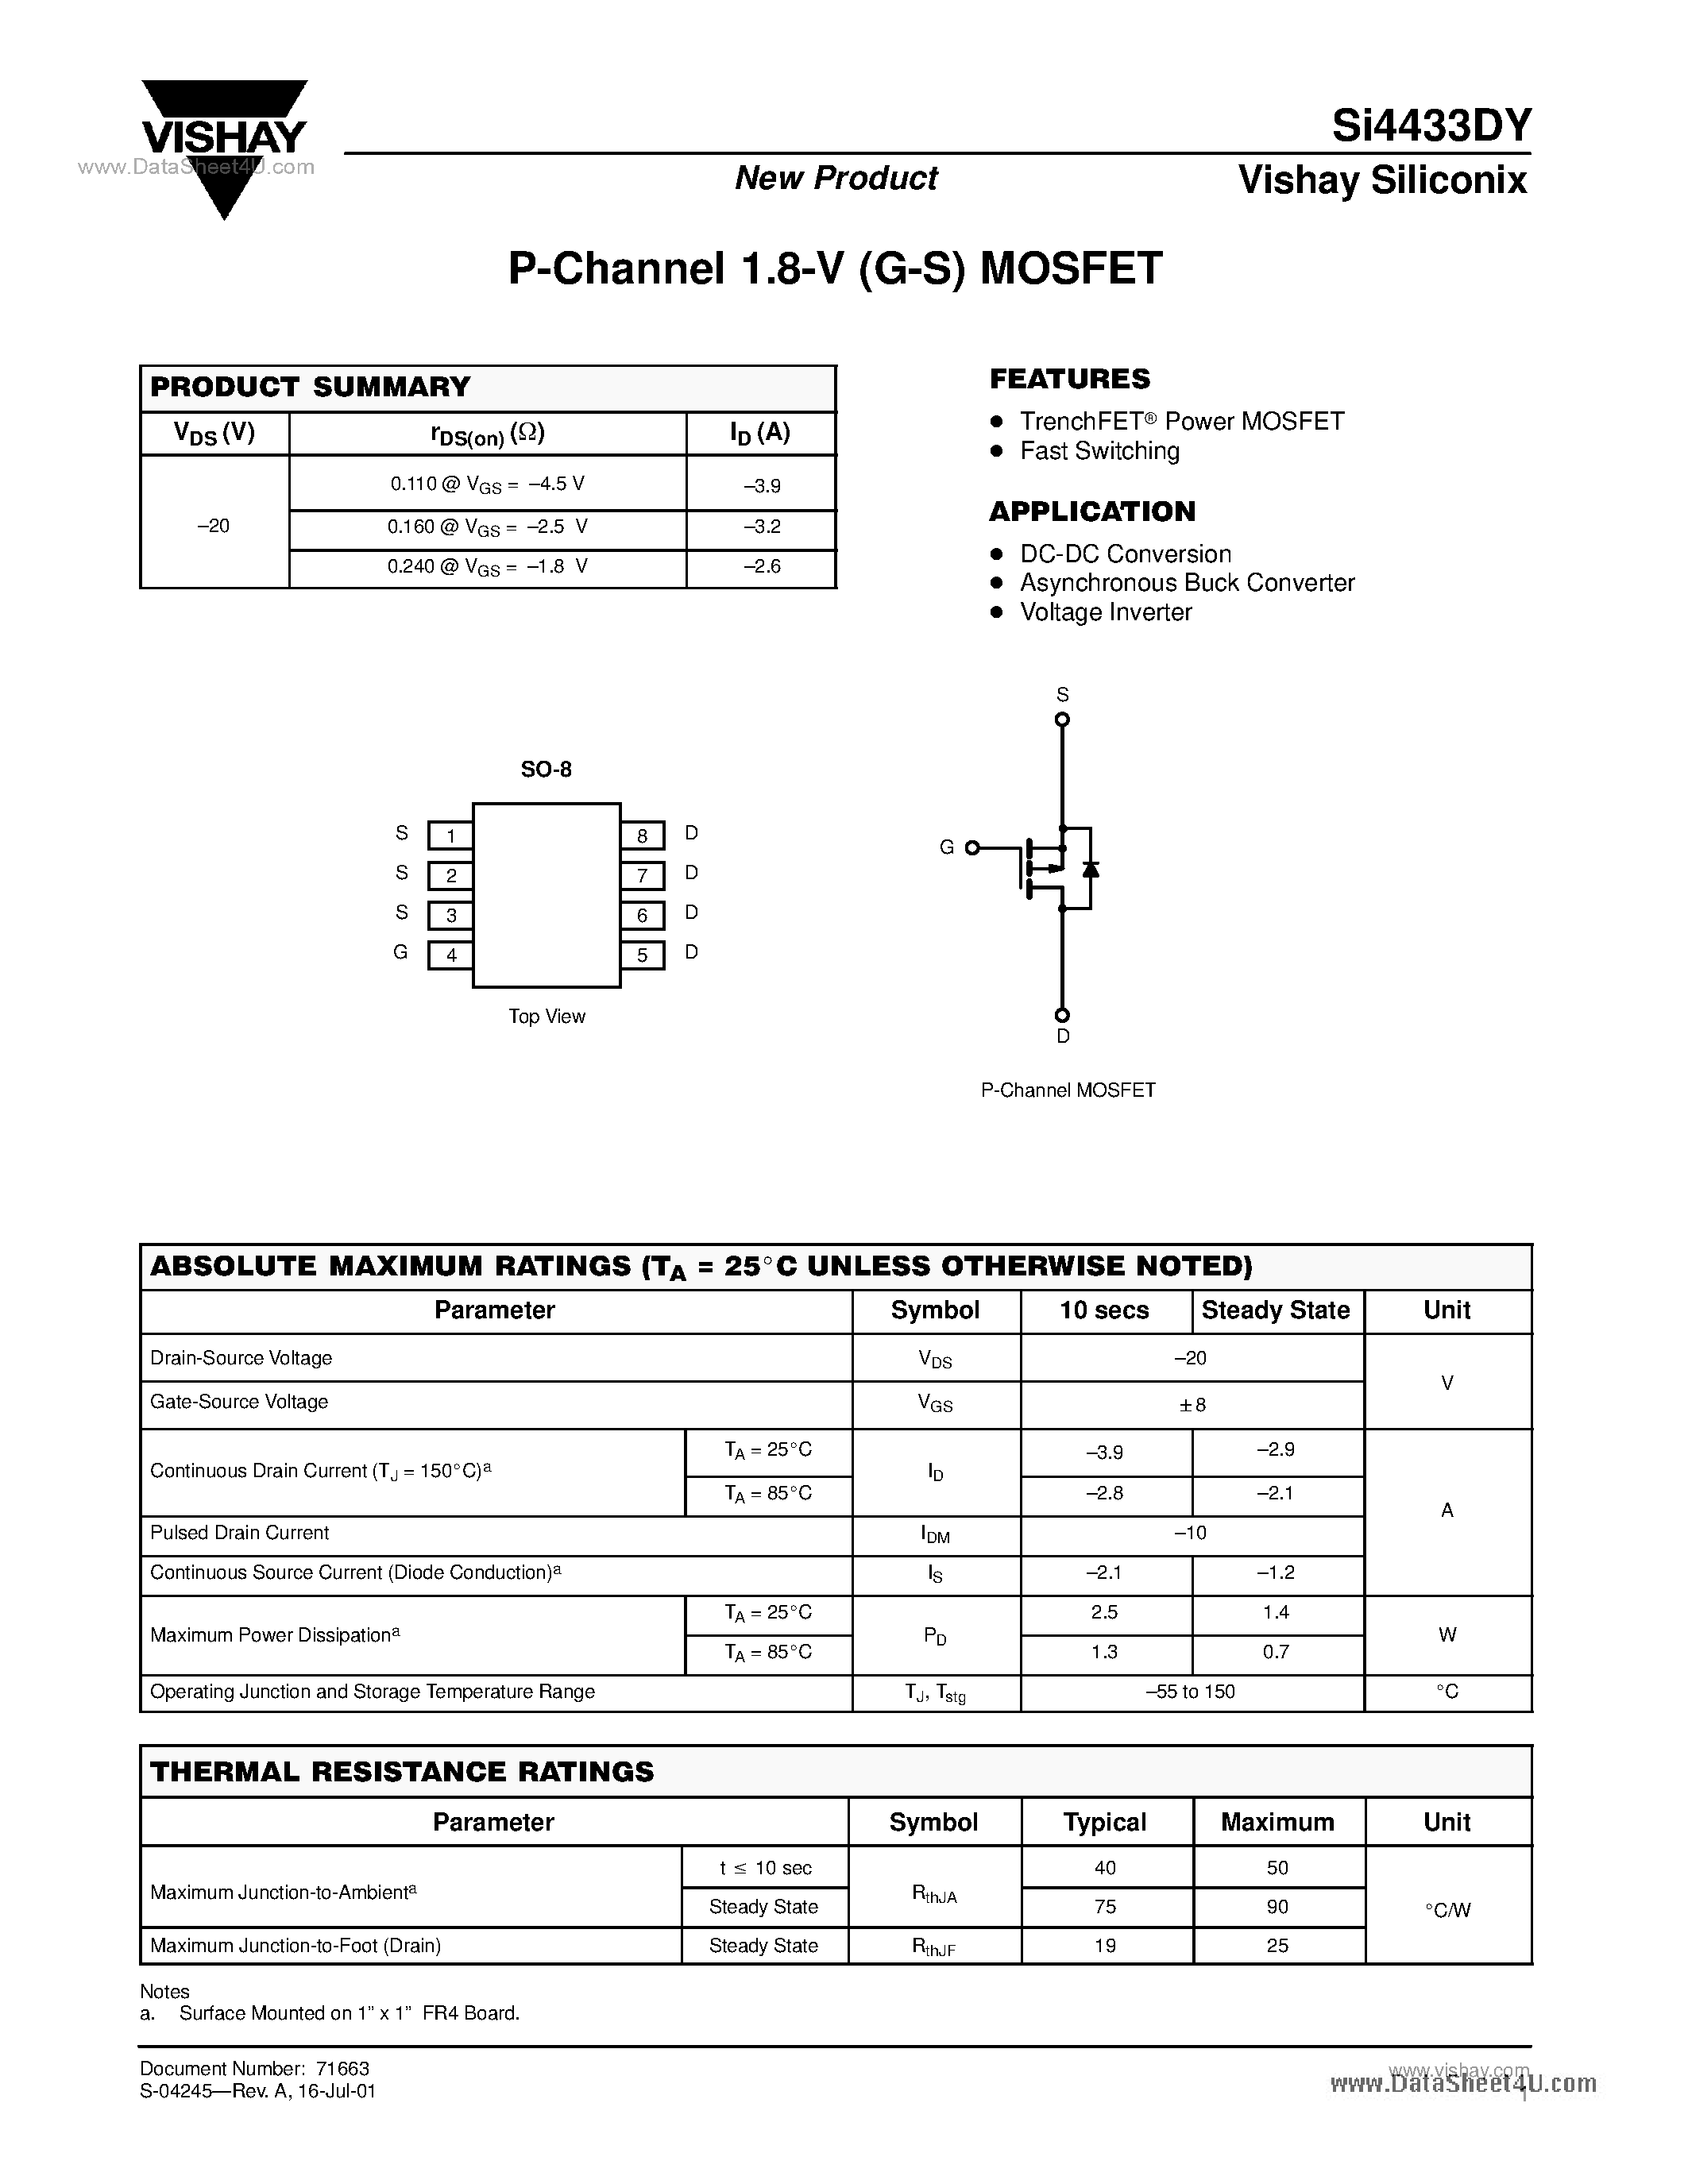 Datasheet SI4433DY - P-Channel 1.8-V (G-S) MOSFET page 1